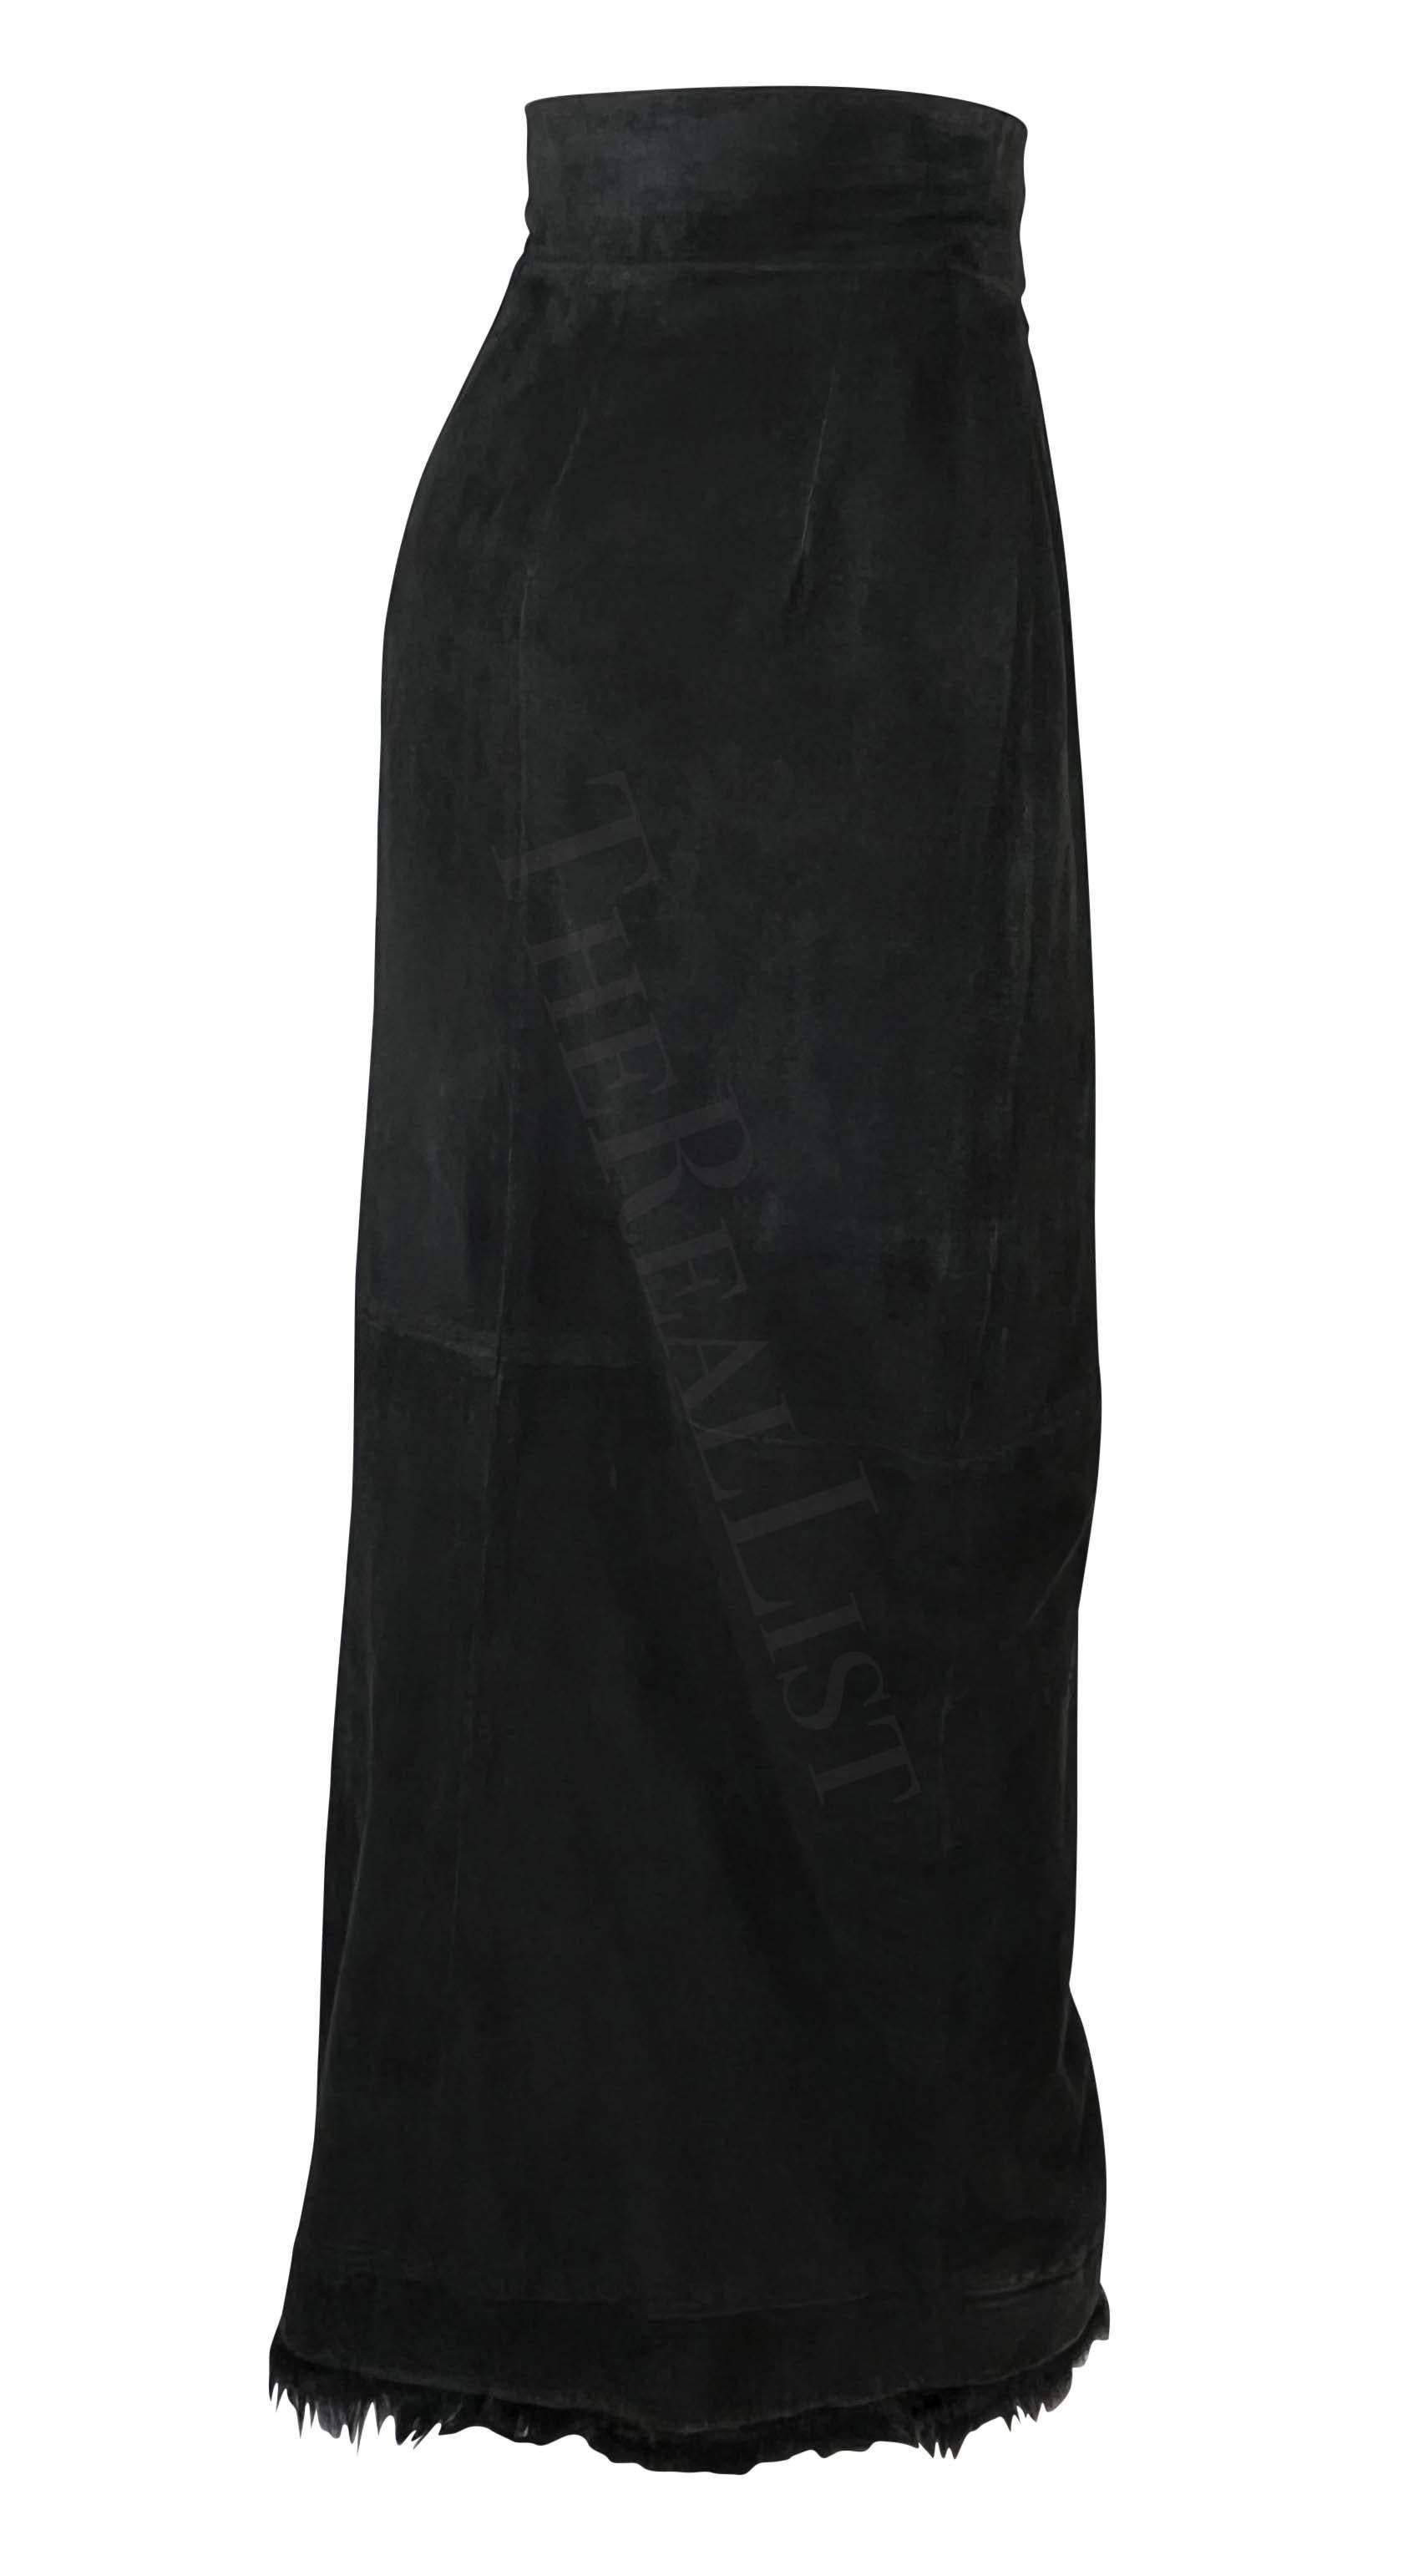 F/W 1996 Gucci by Tom Ford Runway Black Suede Fur Wrap Maxi Slit Skirt For Sale 4